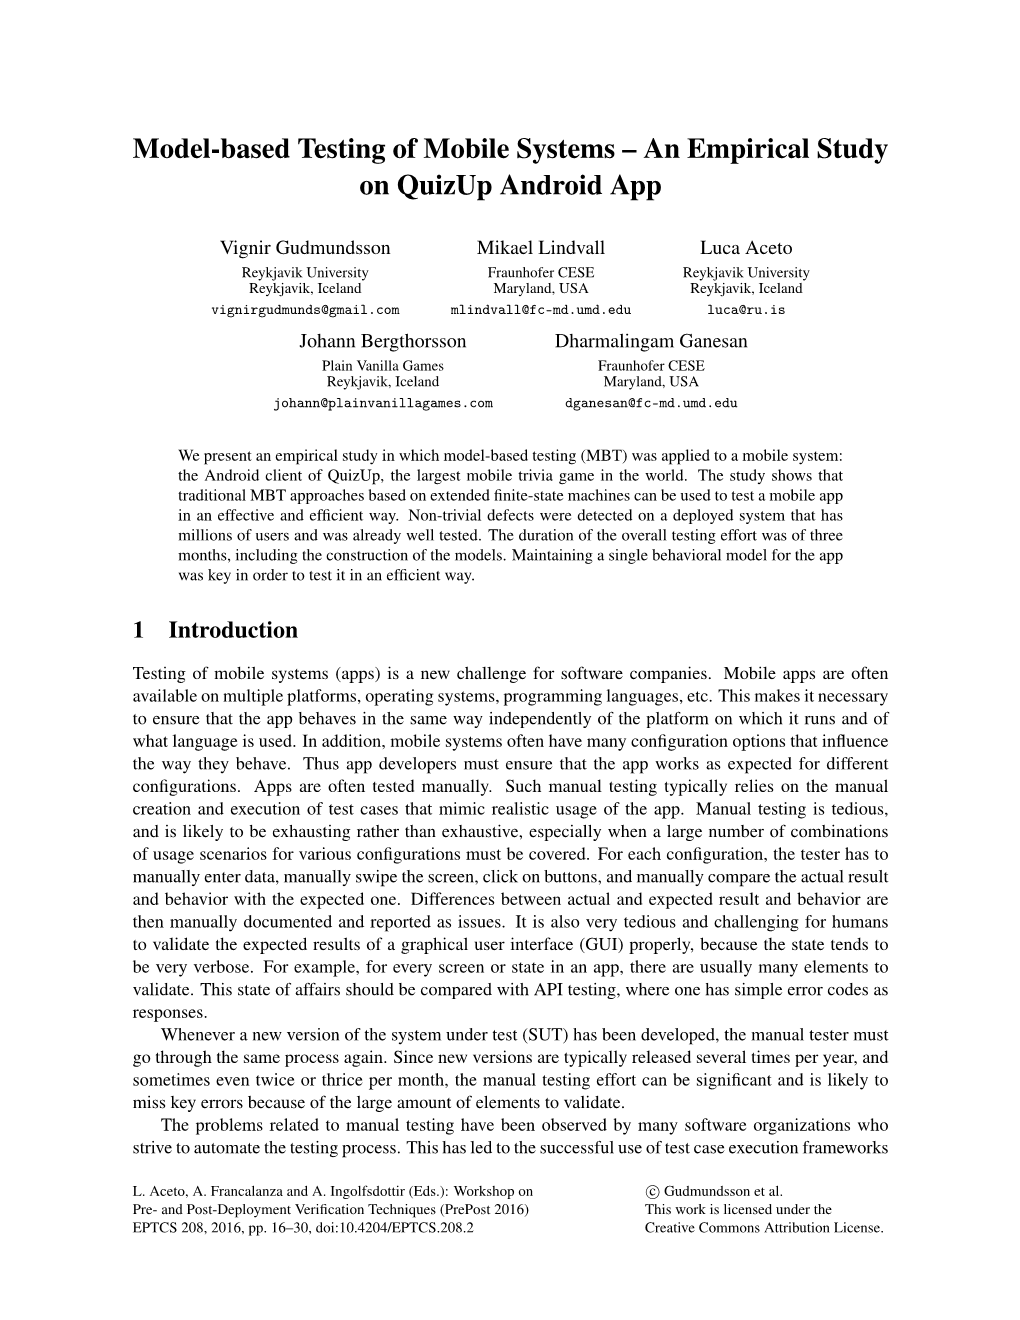 An Empirical Study on Quizup Android App